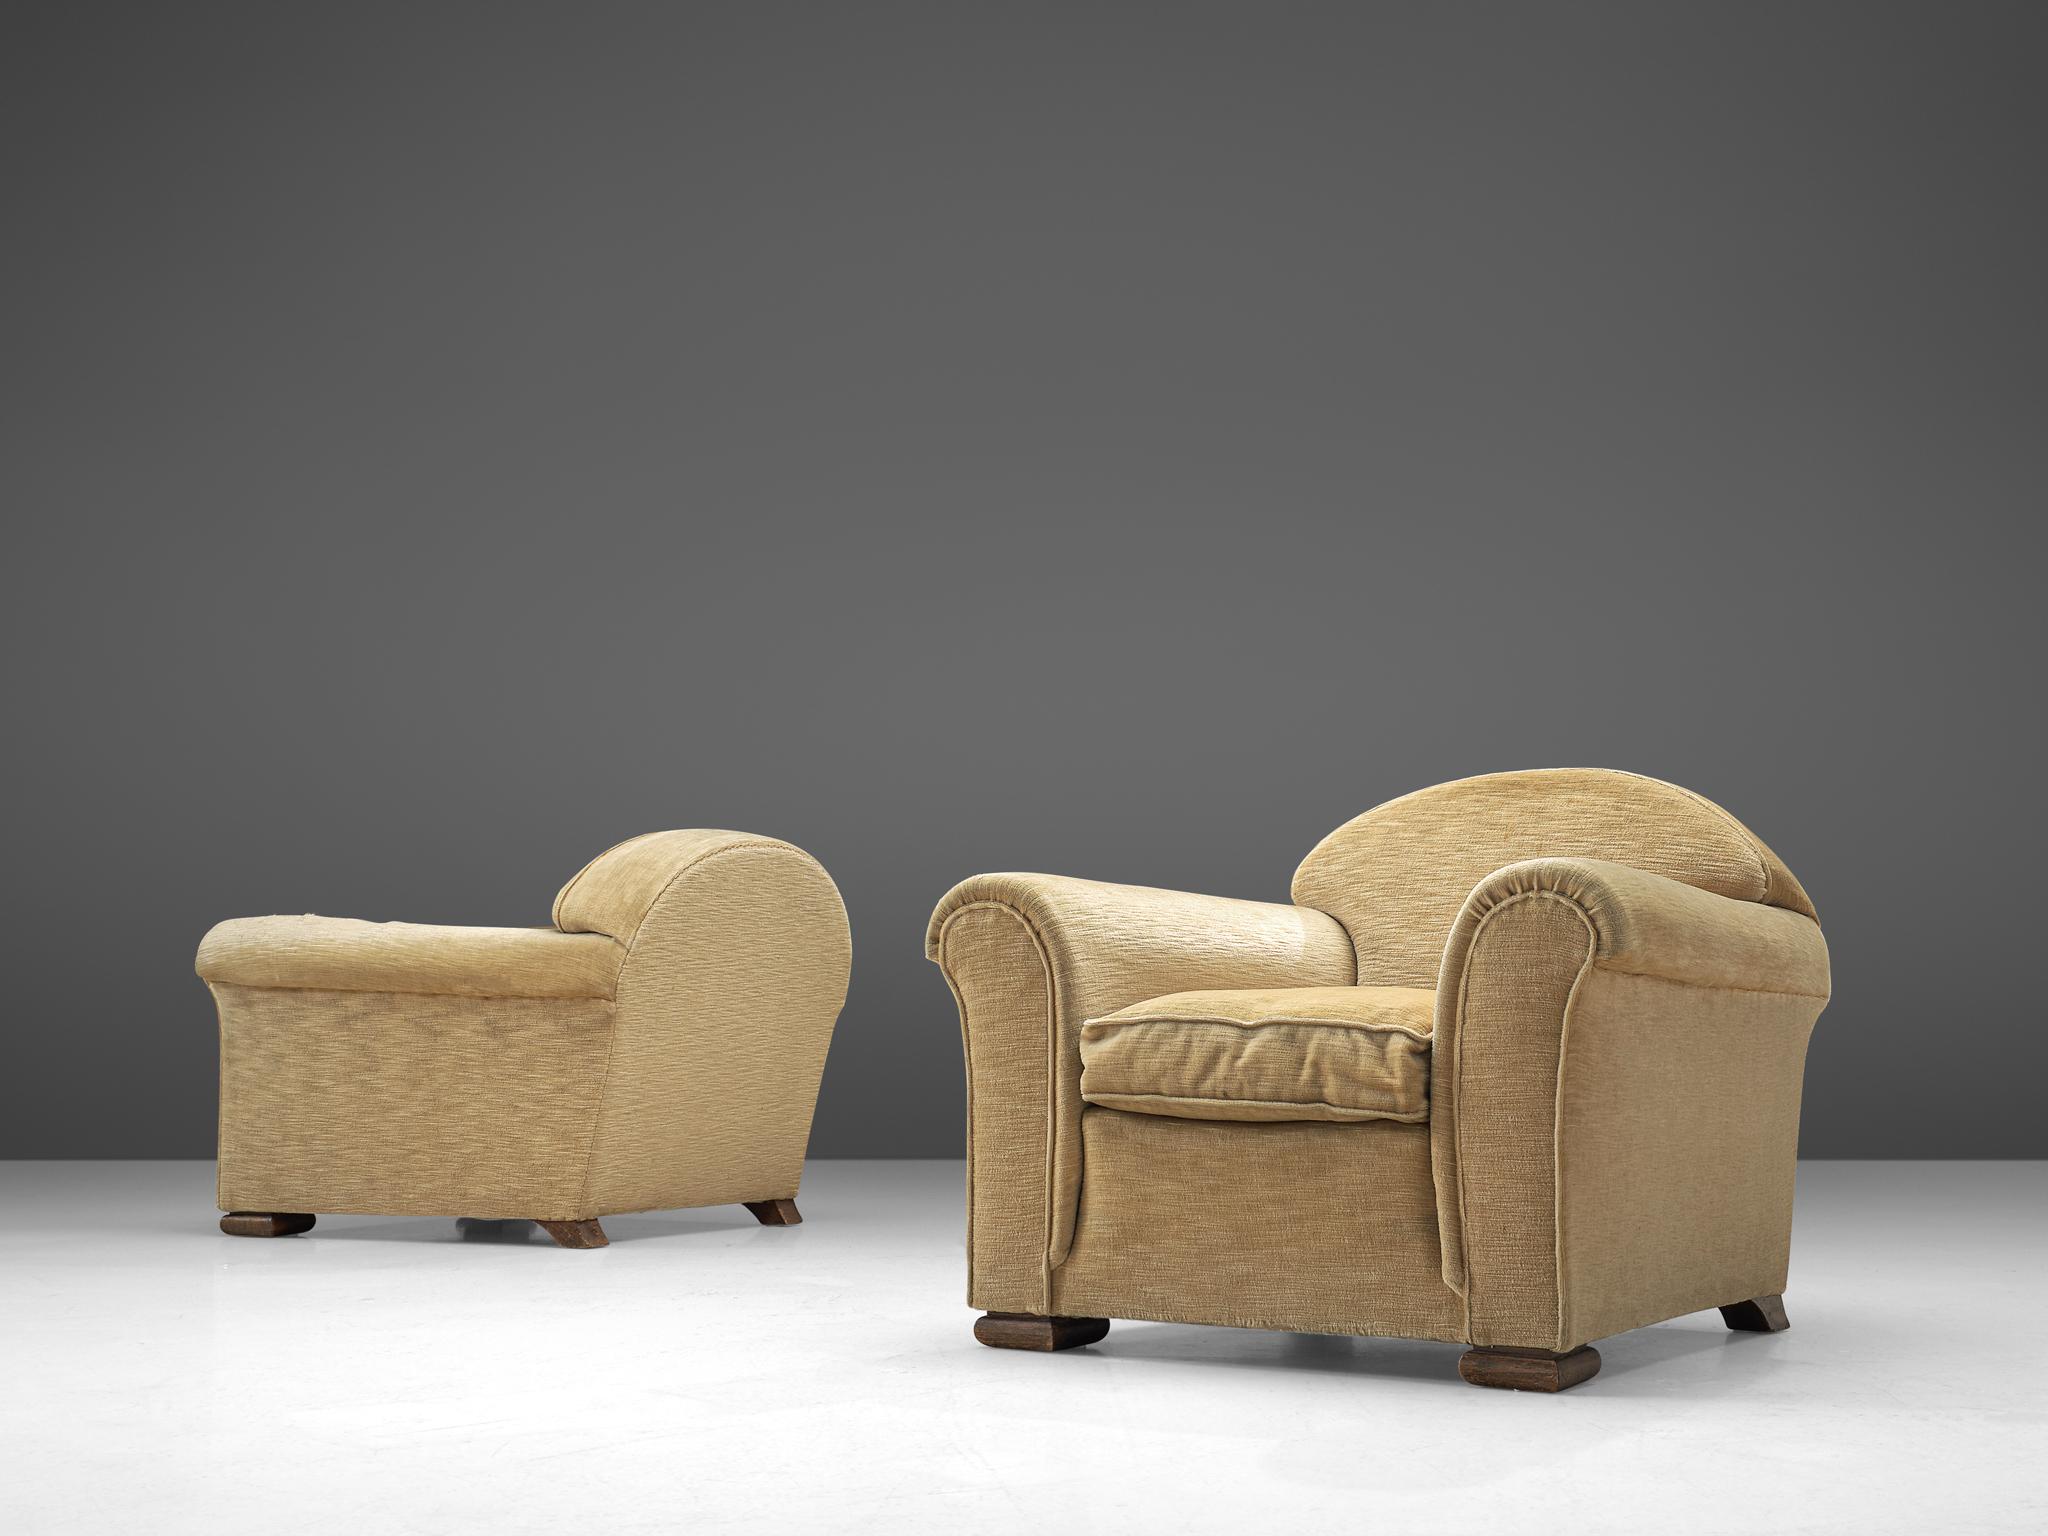 Pair of lounge chairs, fabric and oak, France, 1940s.

Wide and comfortable chairs in a soft beige velours upholstery. Truly extraordinary lounge chairs that feature a very deep seat and rounded armrests that are in the style of Rene Drouet. These